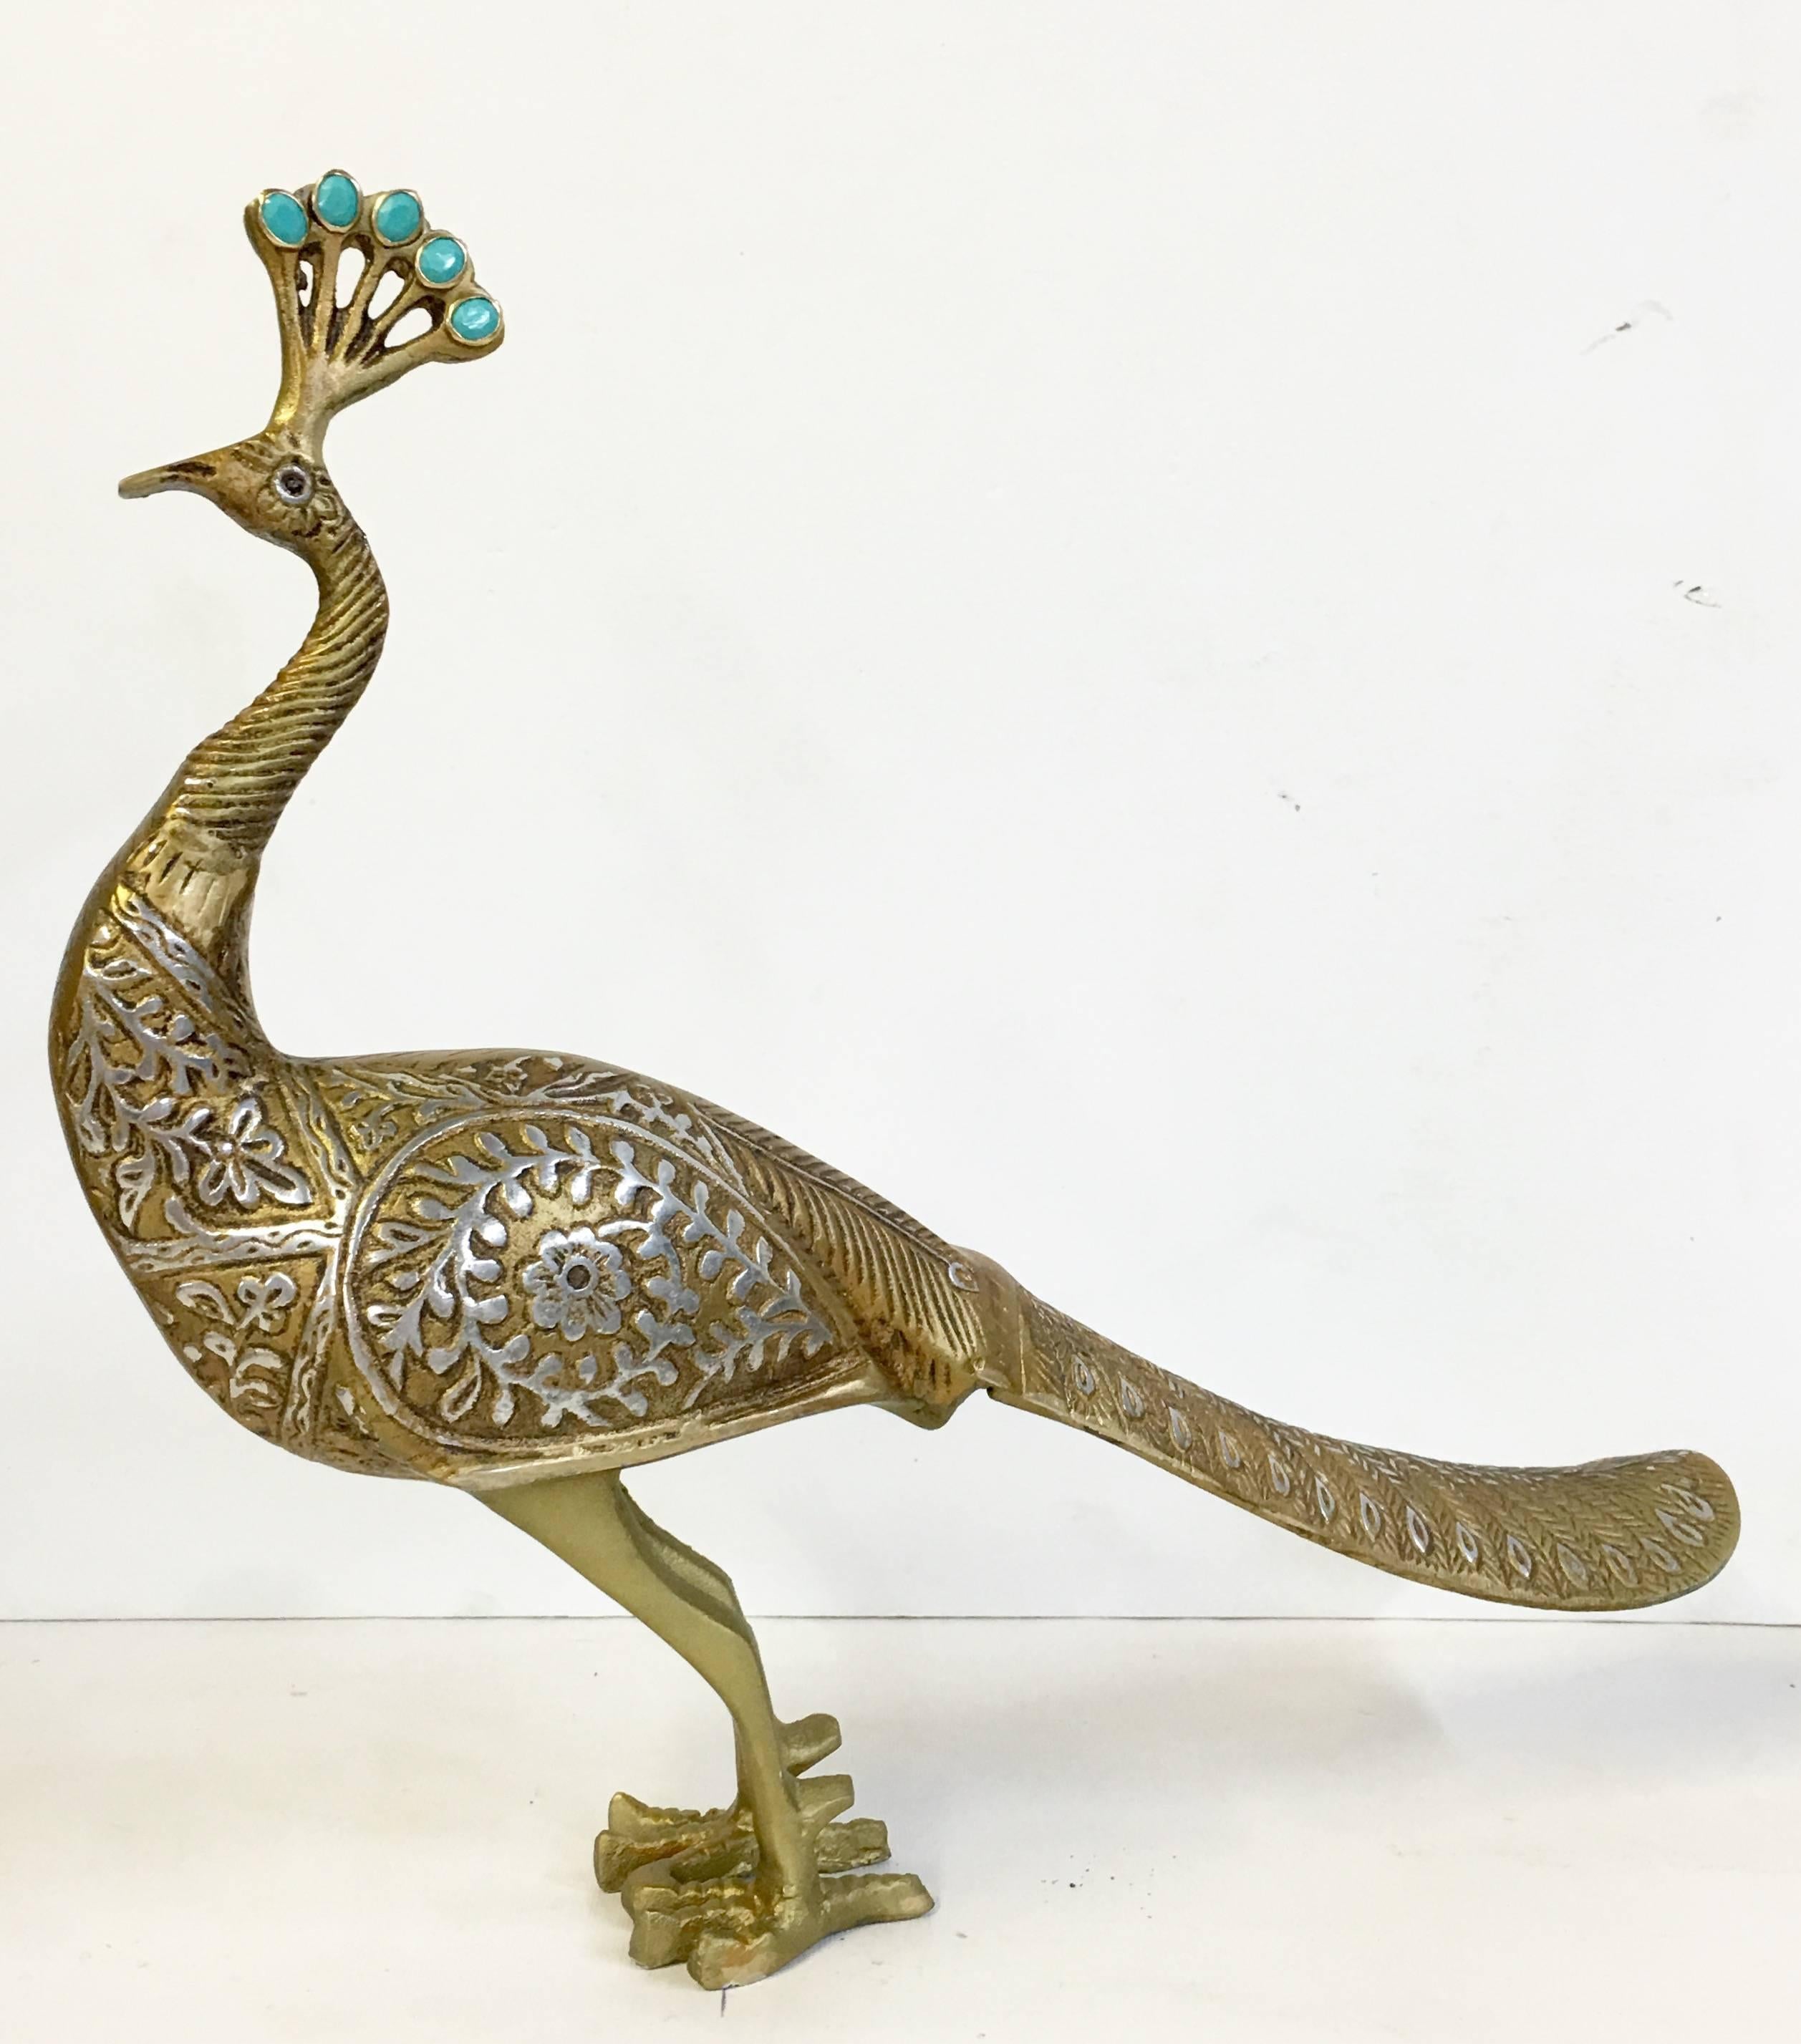 Vintage two tone silver and gold solid brass carved male peacock standing sculpture statue. Faux turquoise double sided cabochon set stones at crown.